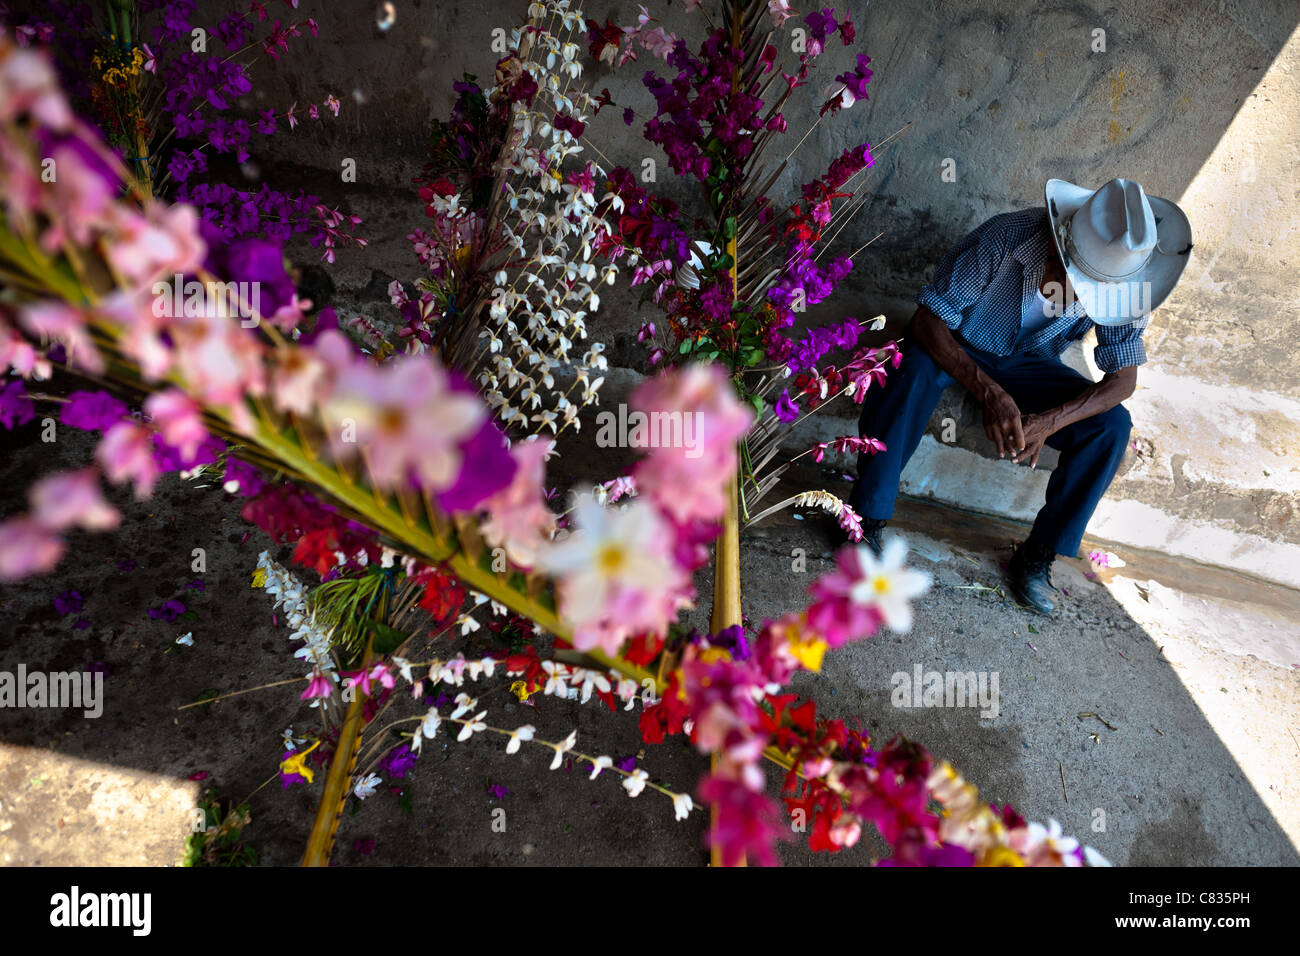 A Salvadoran cowboy rests during the Flower & Palm Festival in Panchimalco, El Salvador. Stock Photo